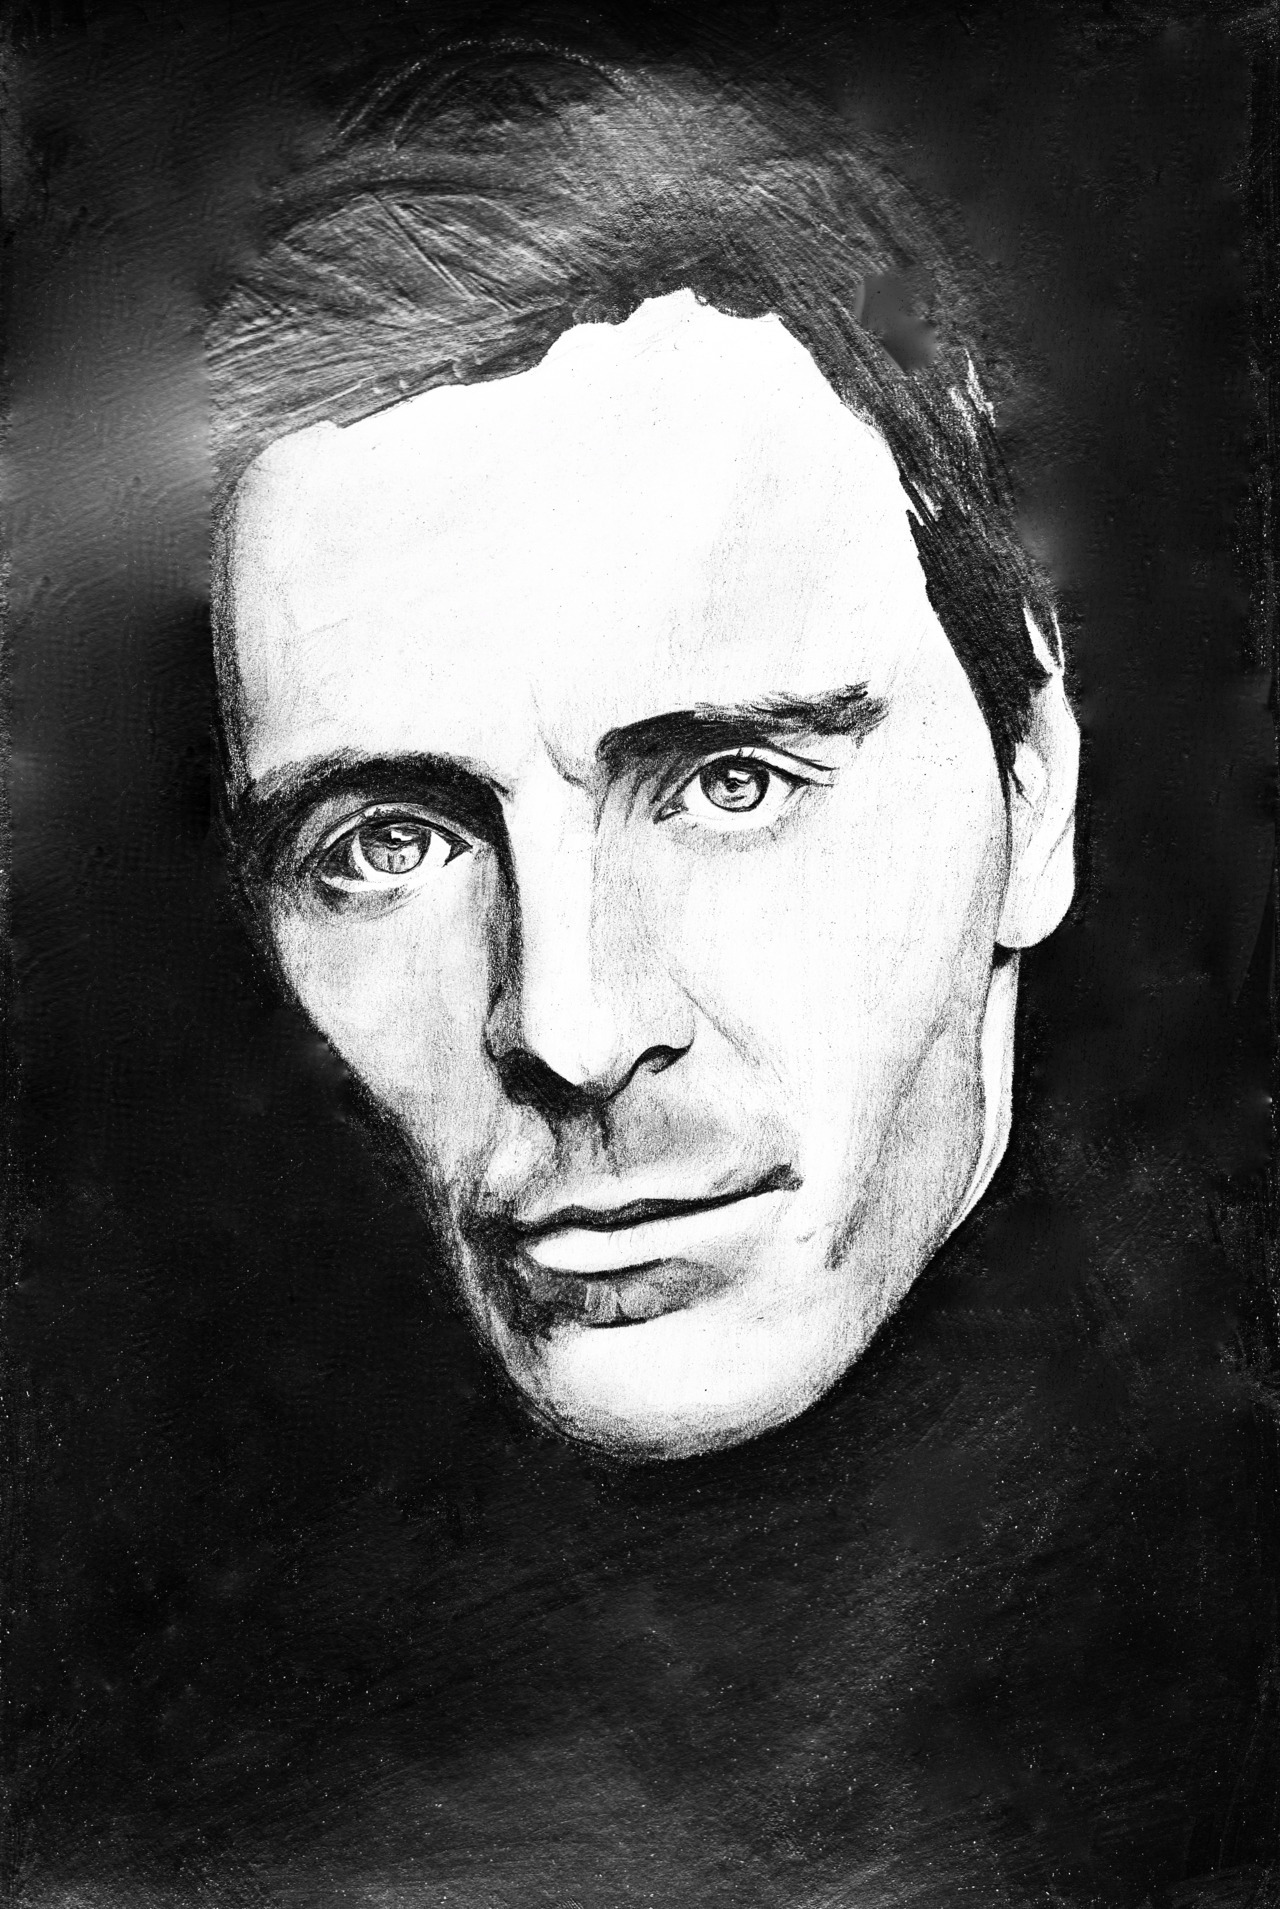 This is Michael Fassbender in graphite, I do apologise for the streak of light my scanner decided to contribute.